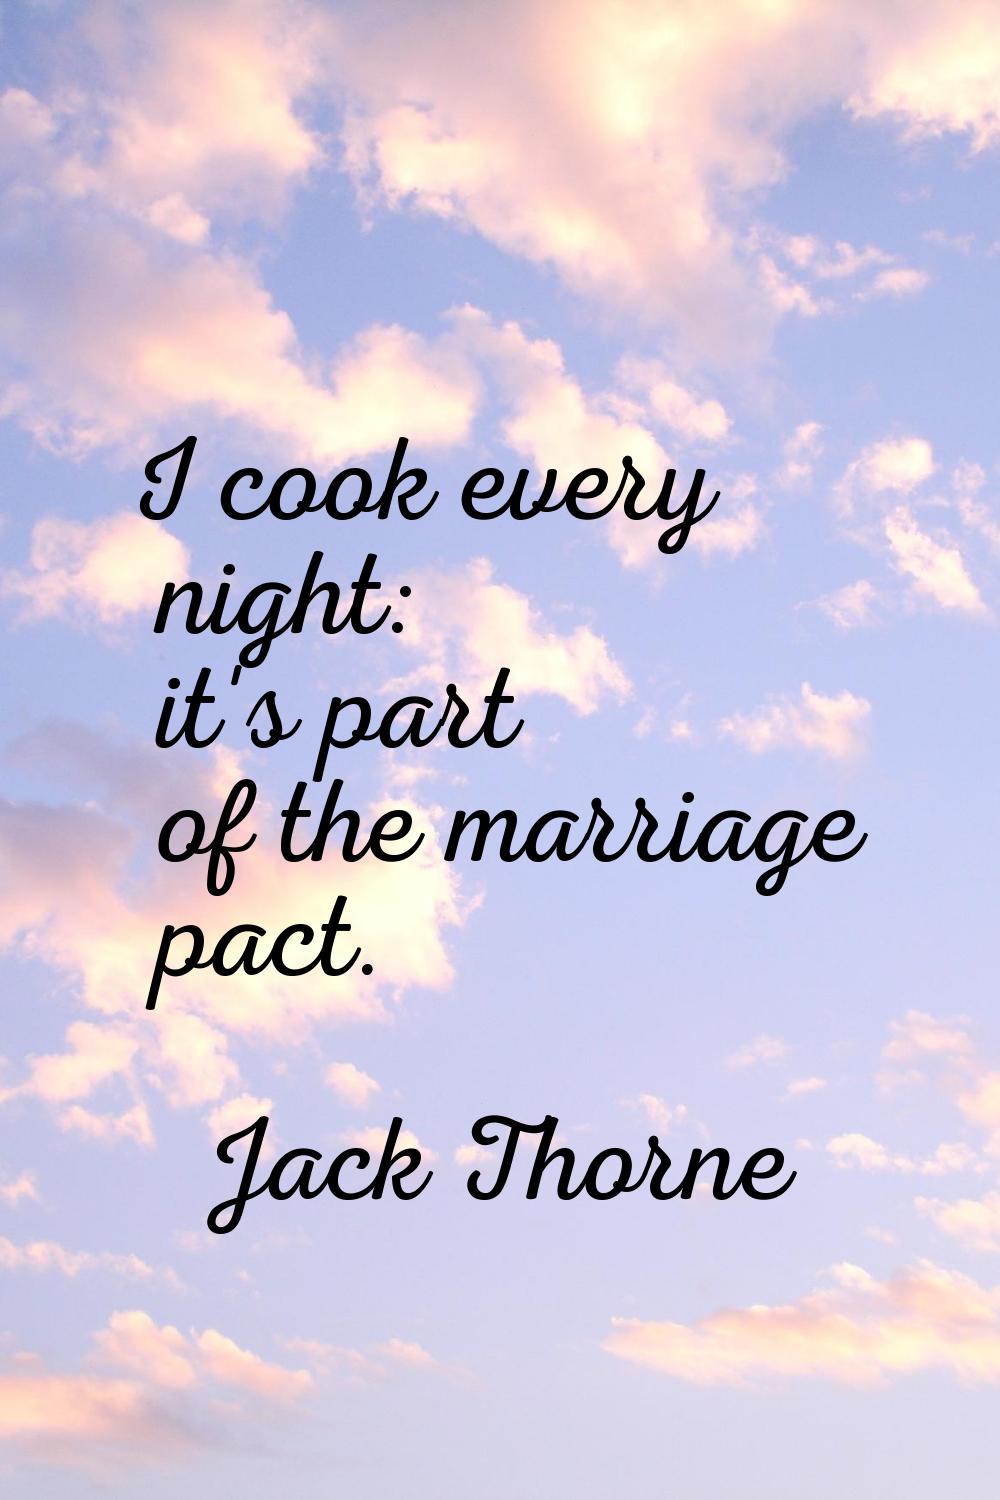 I cook every night: it's part of the marriage pact.